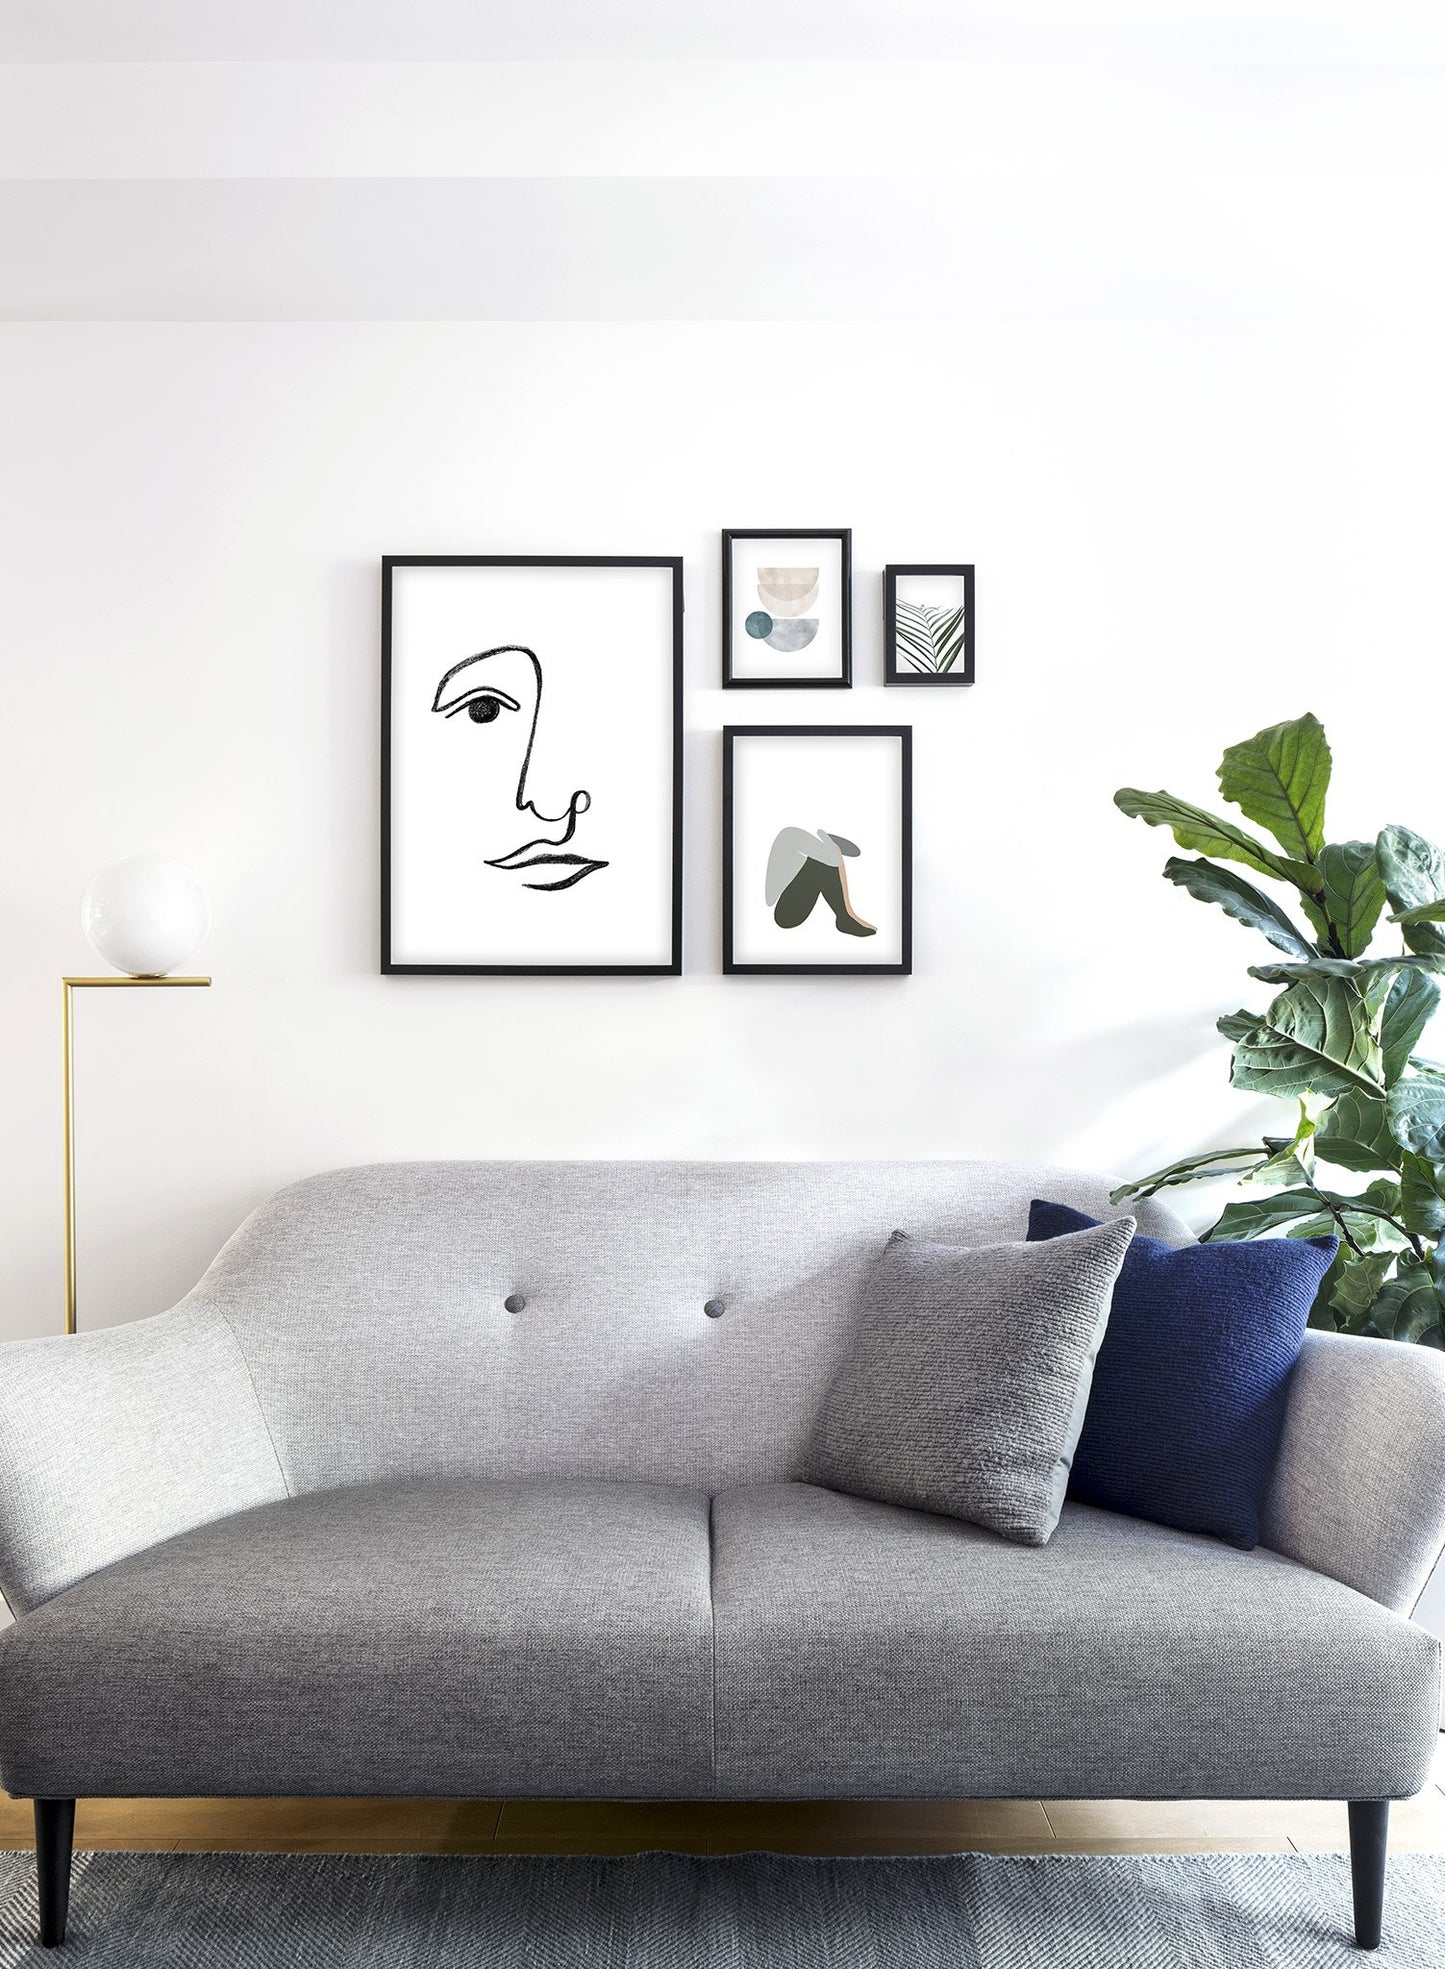 Modern minimalist pencil sketch poster by Opposite Wall - Connected - Lifestyle Gallery - Living Room